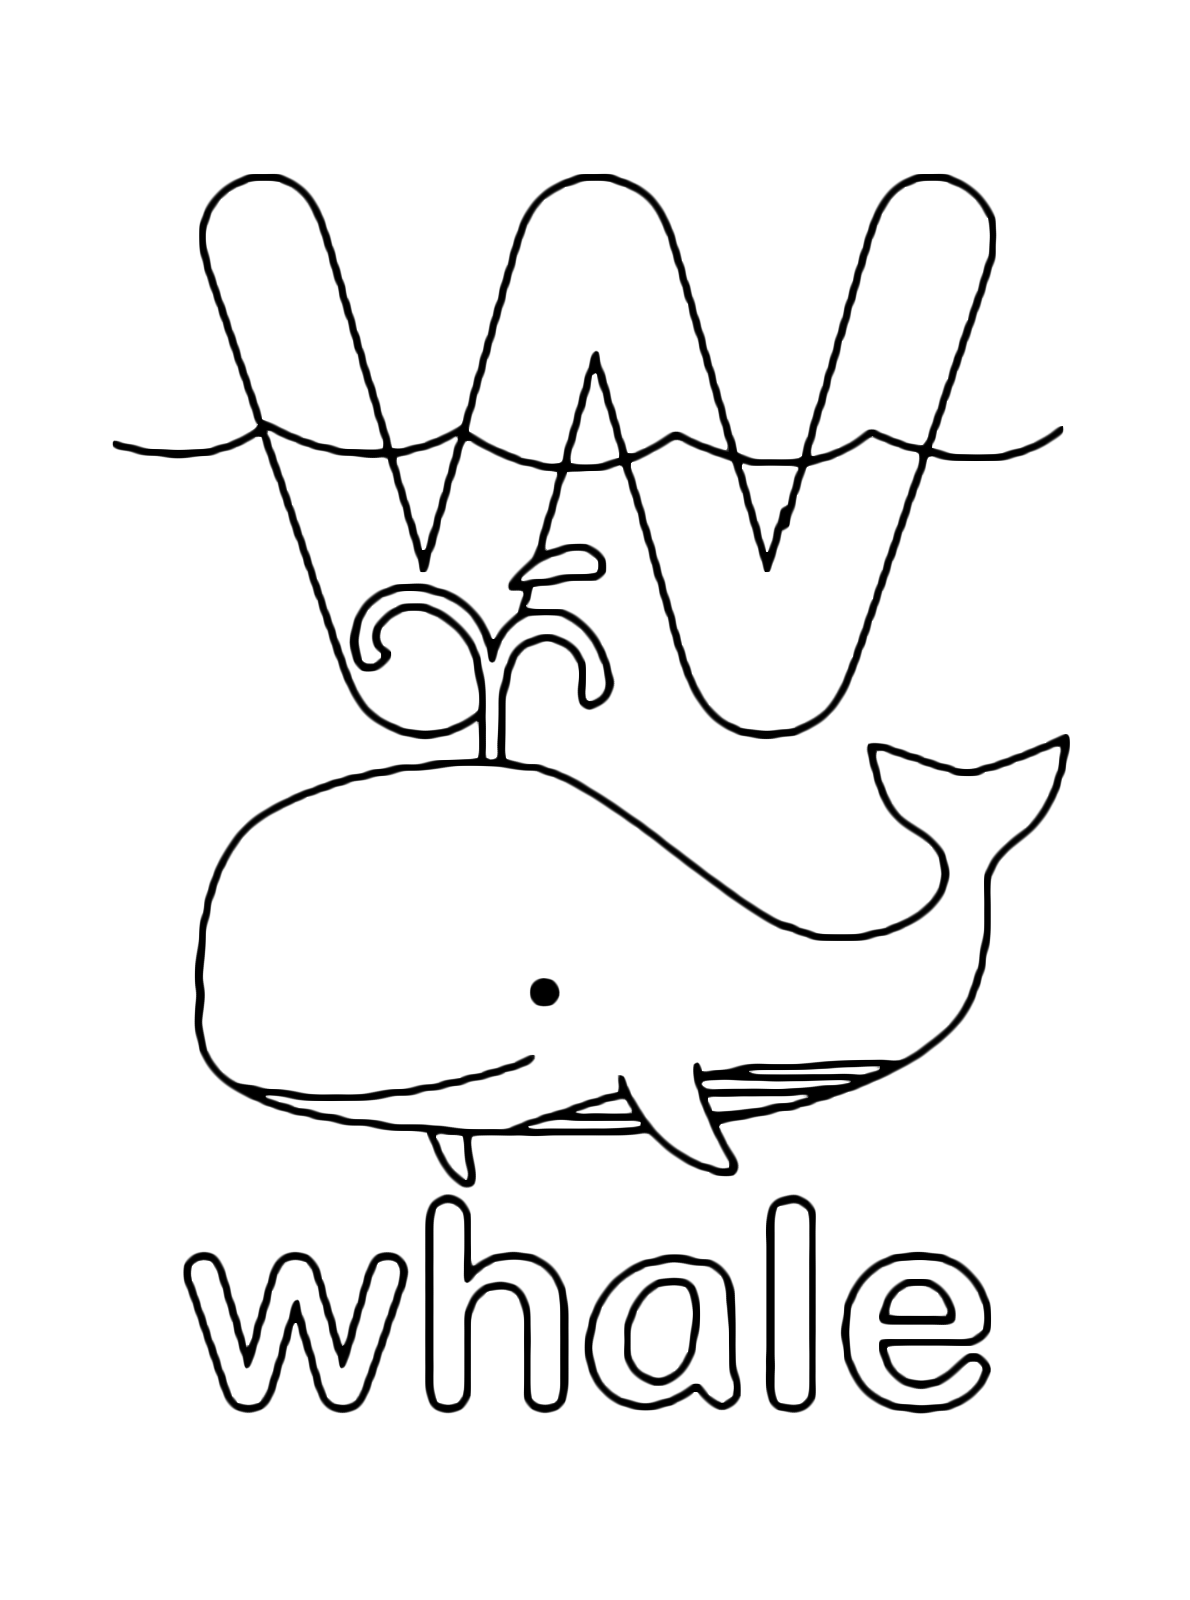 Letters and numbers - w for whale lowercase letter